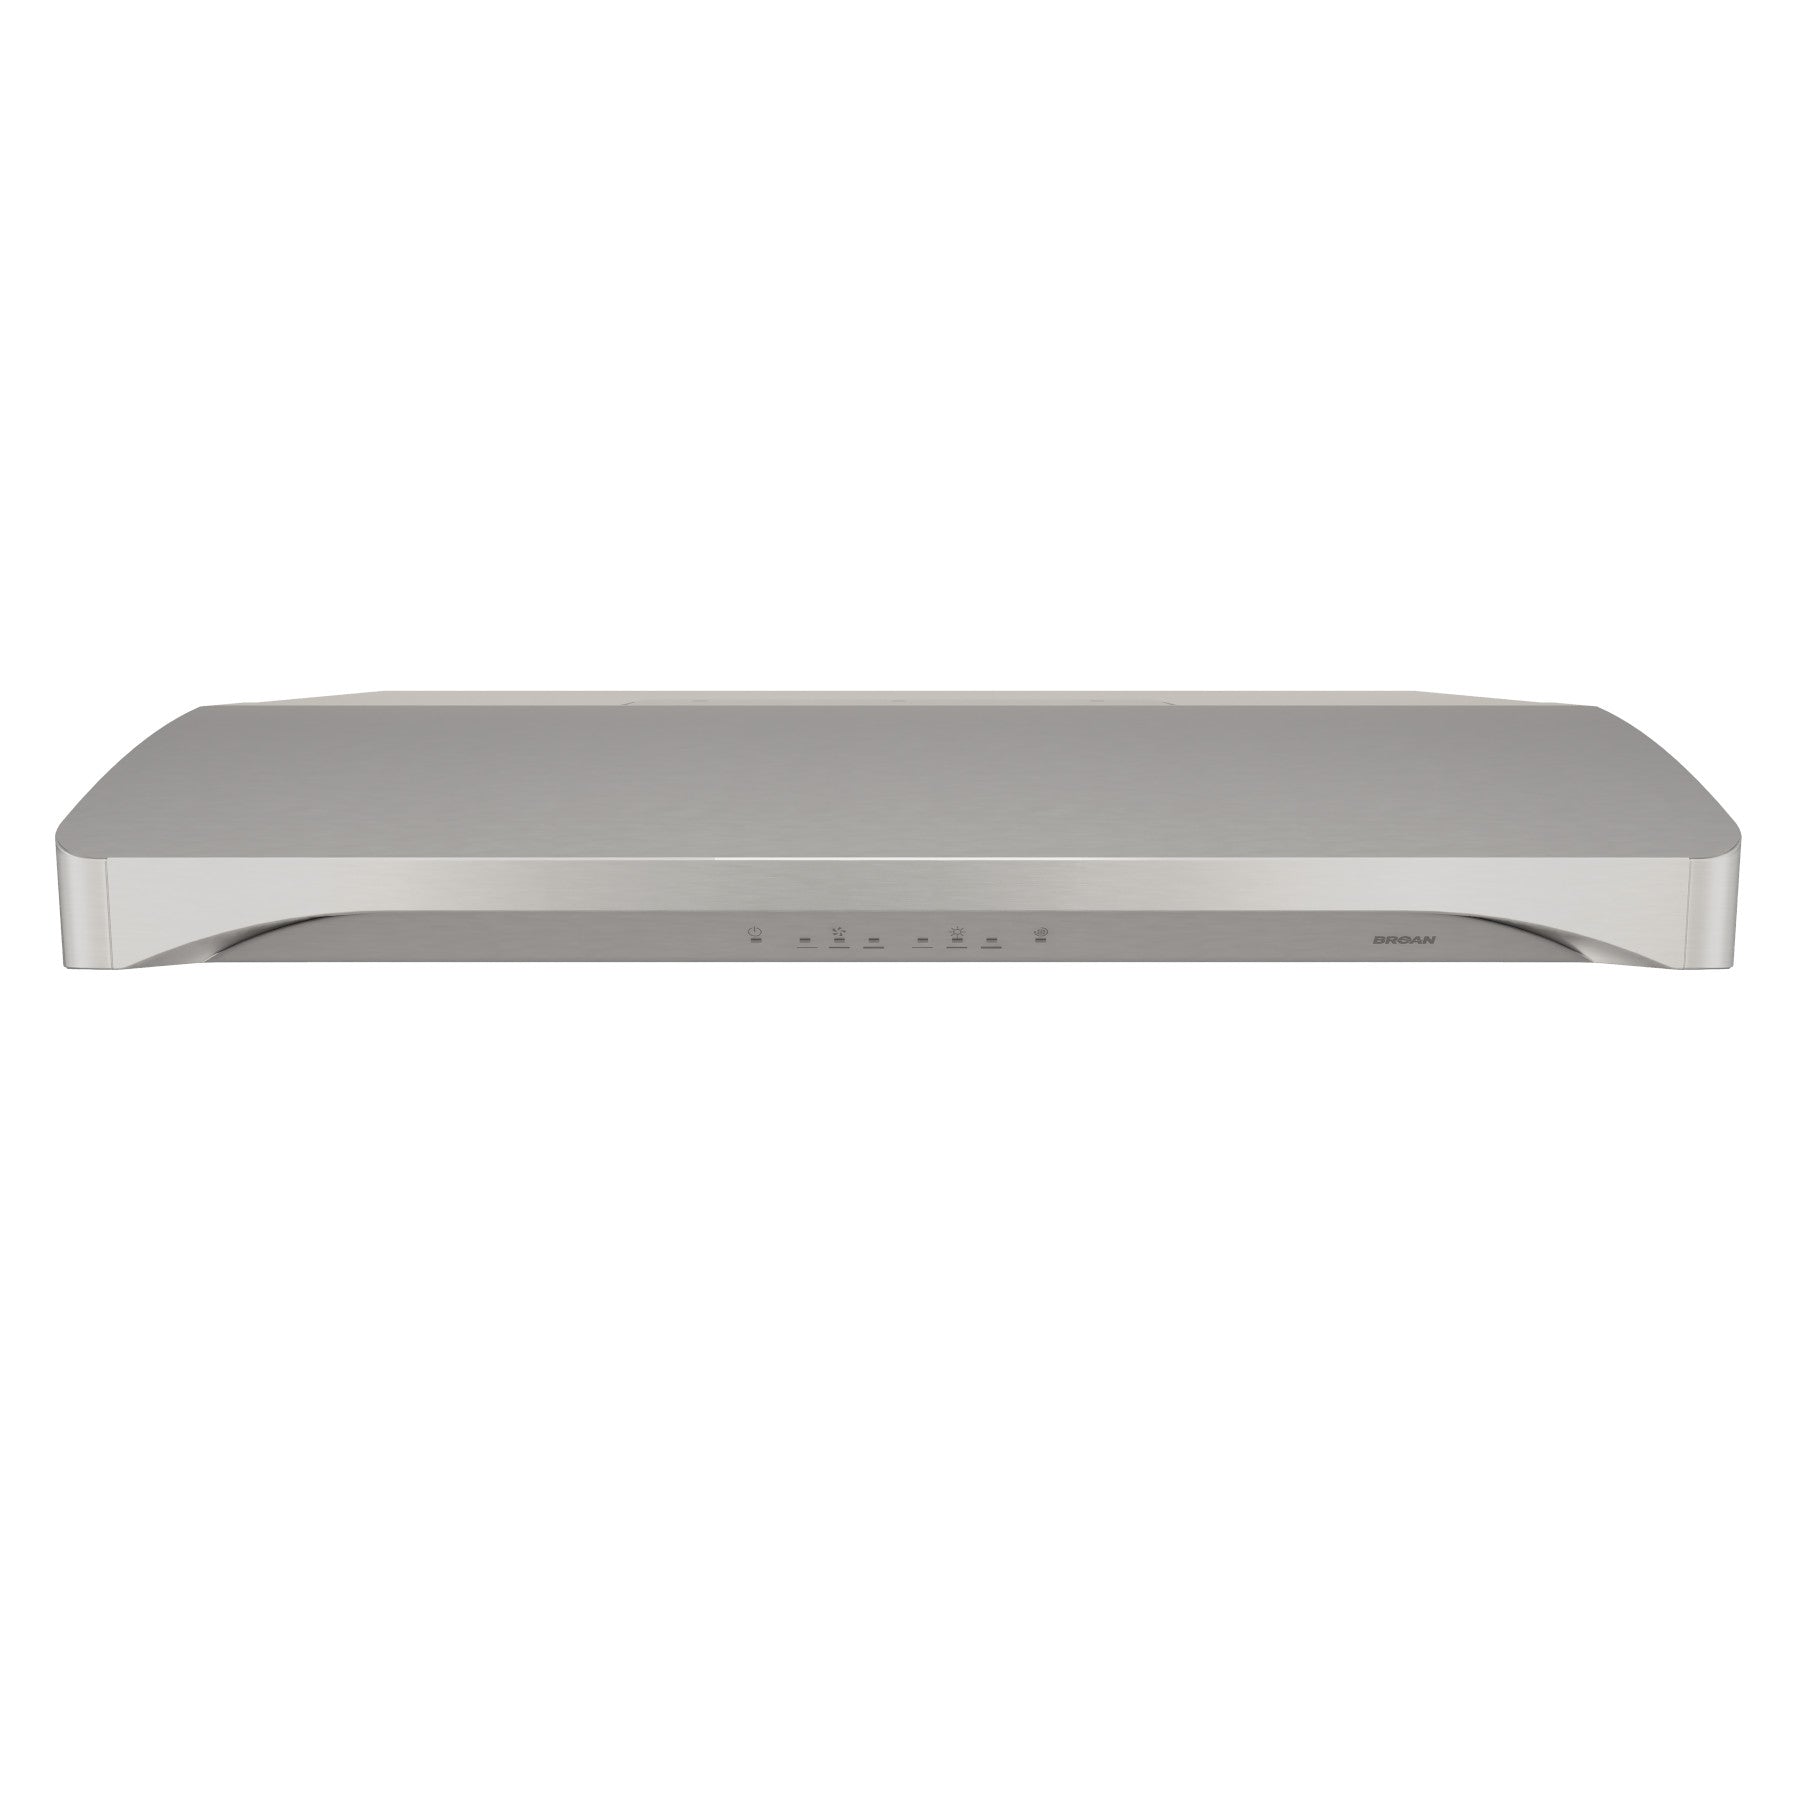 Broan - 36 Inch 400 CFM Under Cabinet Range Vent in Stainless - BQLA136SS